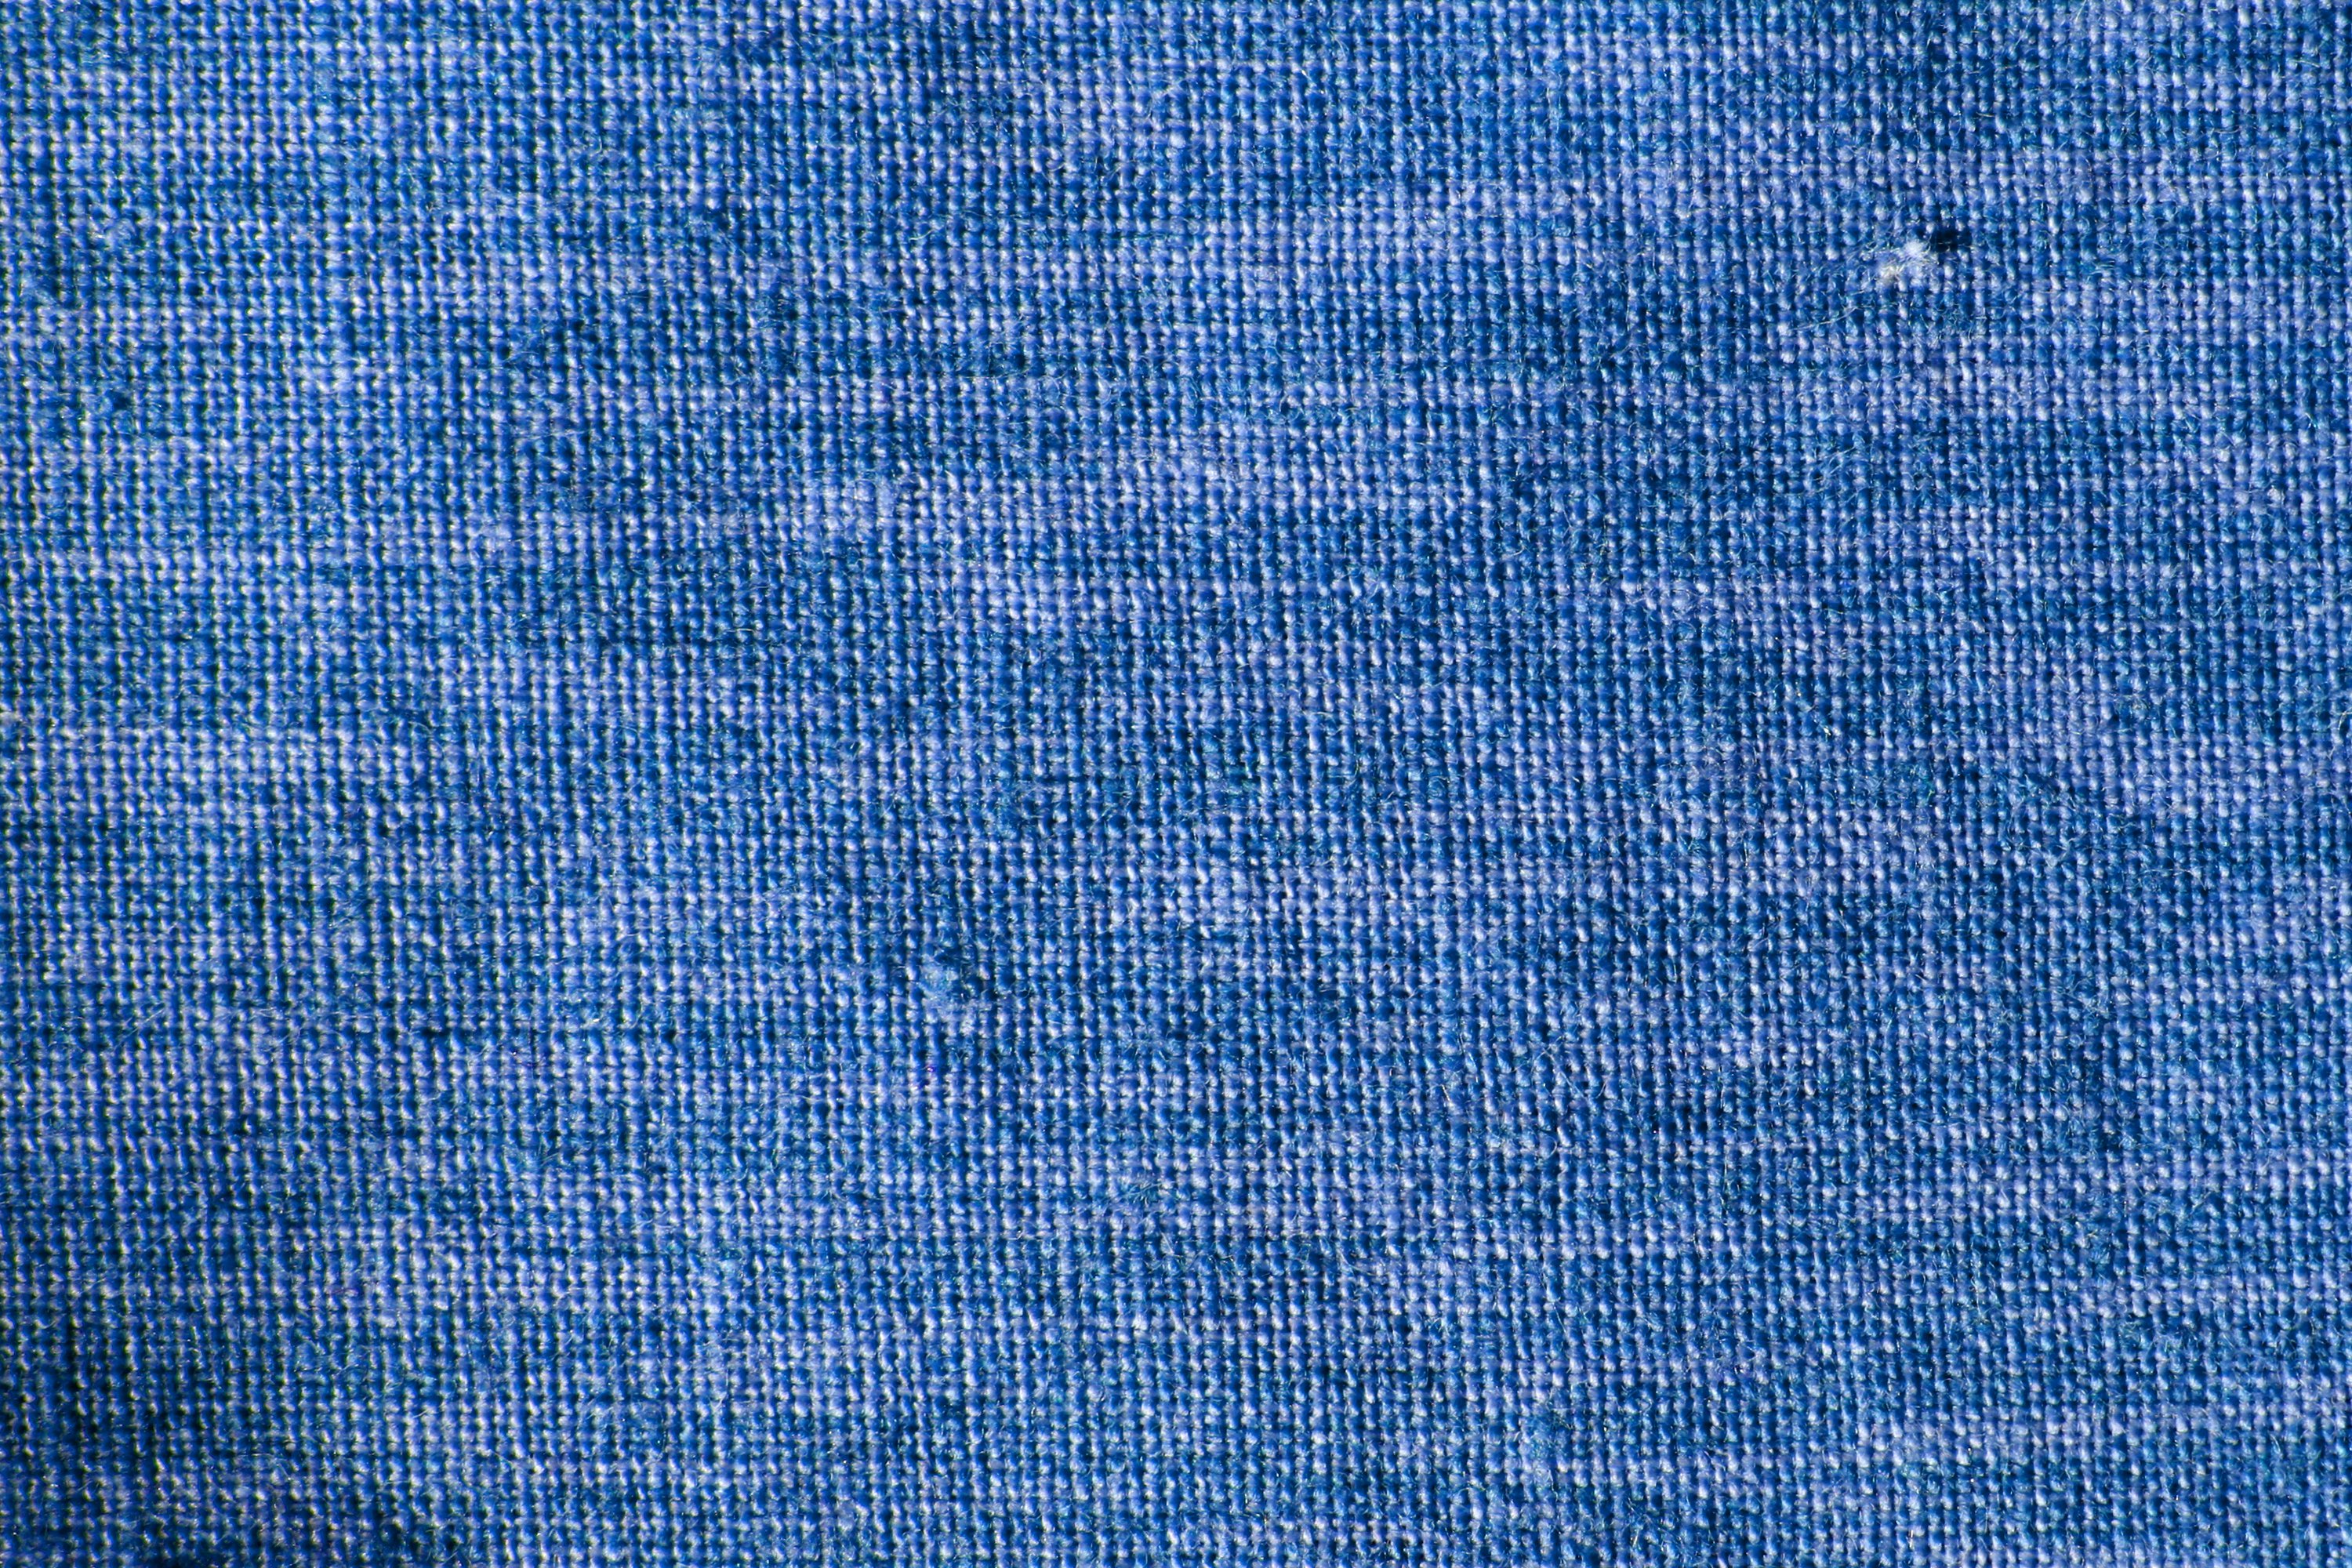 Blue Woven Fabric Close Up Texture Picture | Free ...
